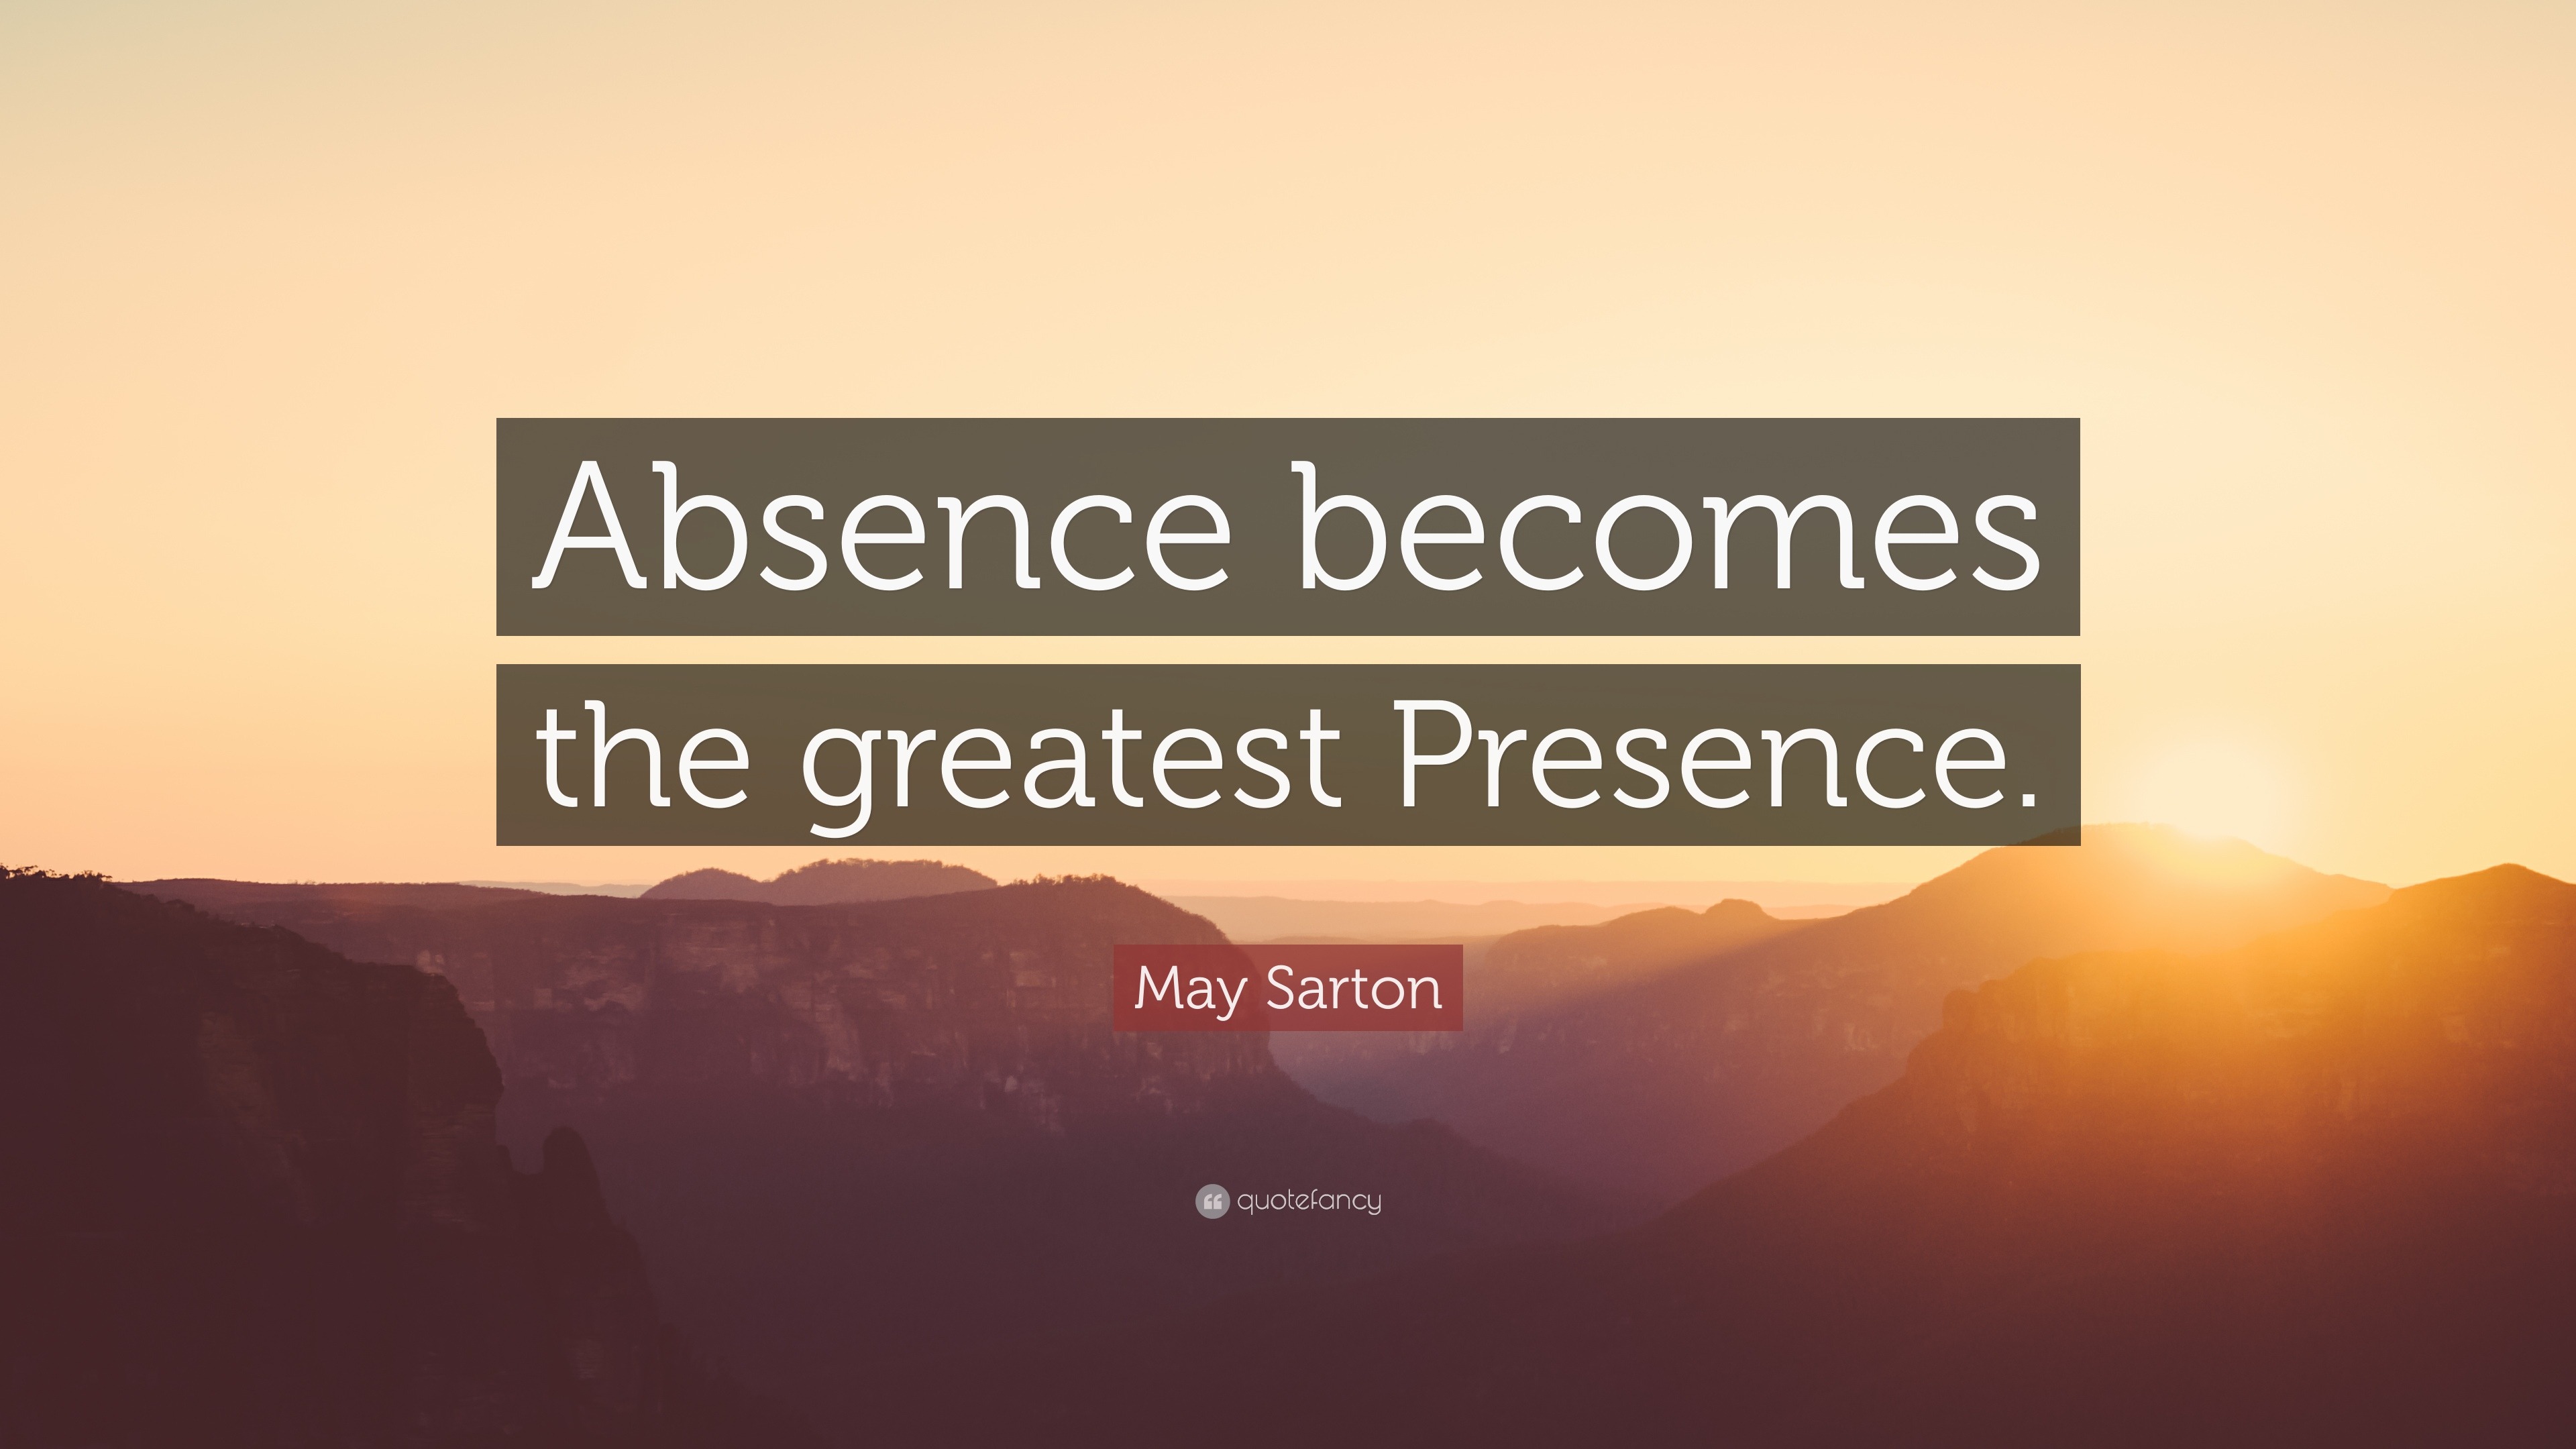 May Sarton Quote: “Absence becomes the greatest Presence.”